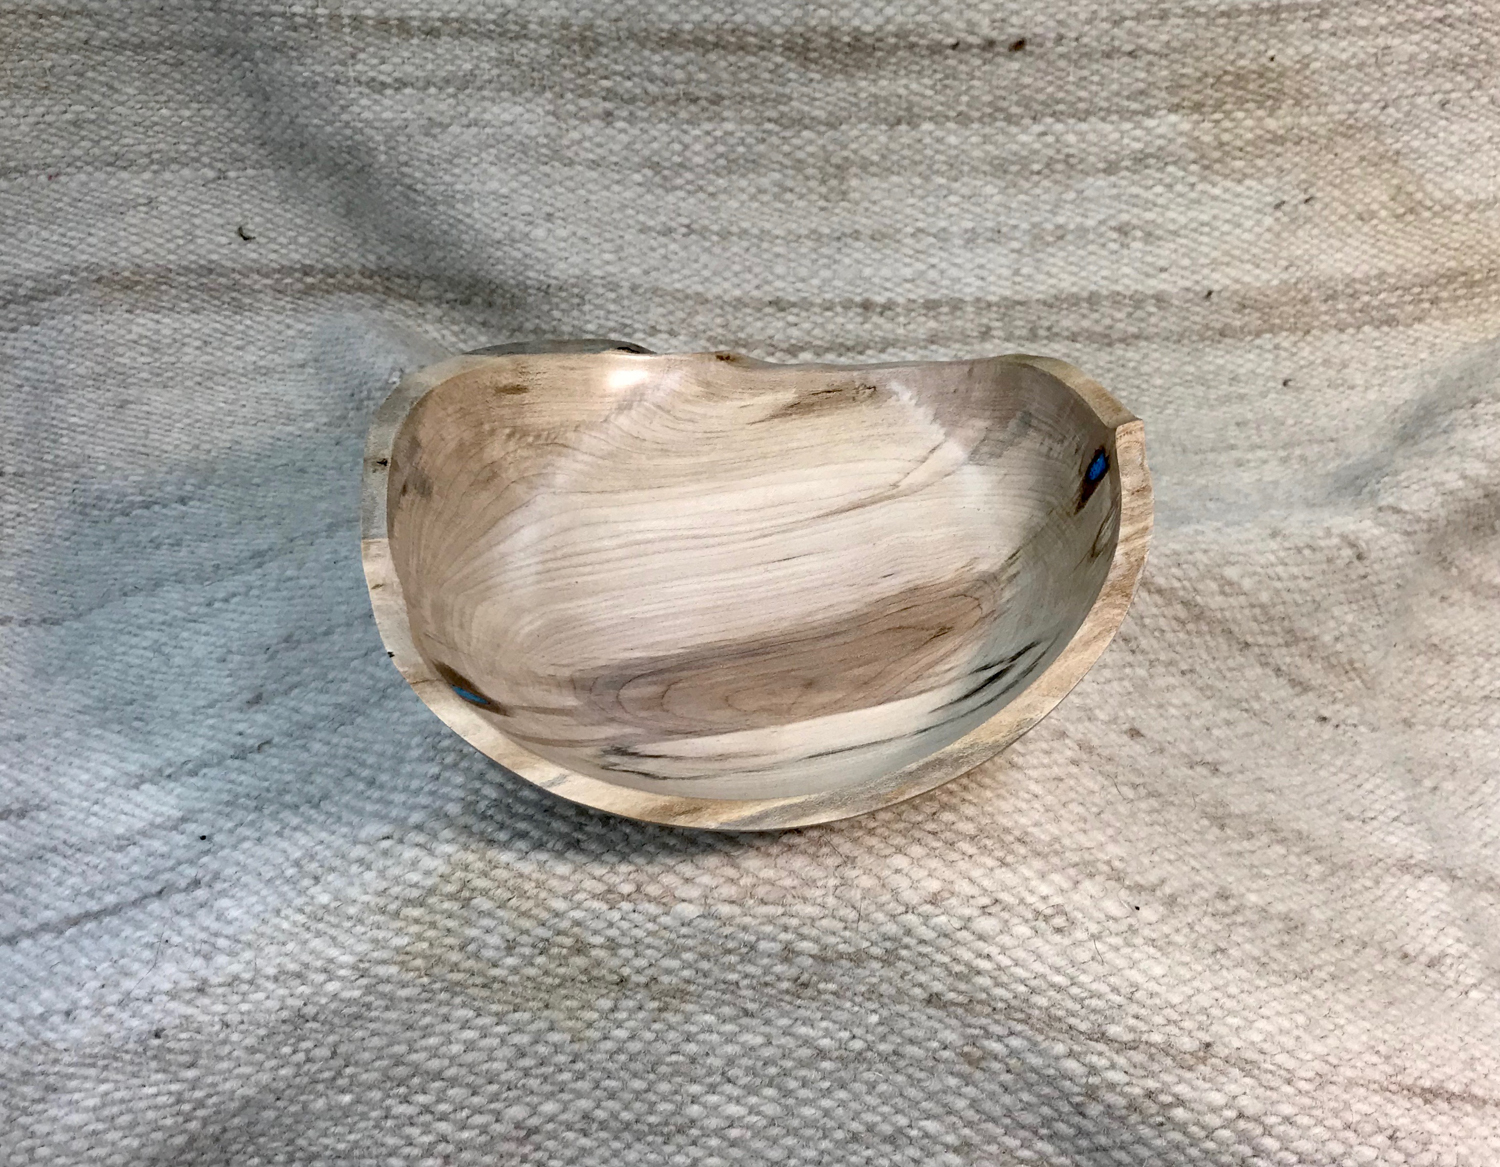 Maple, natural rim, 9x8x3 inches by Sandy Renna